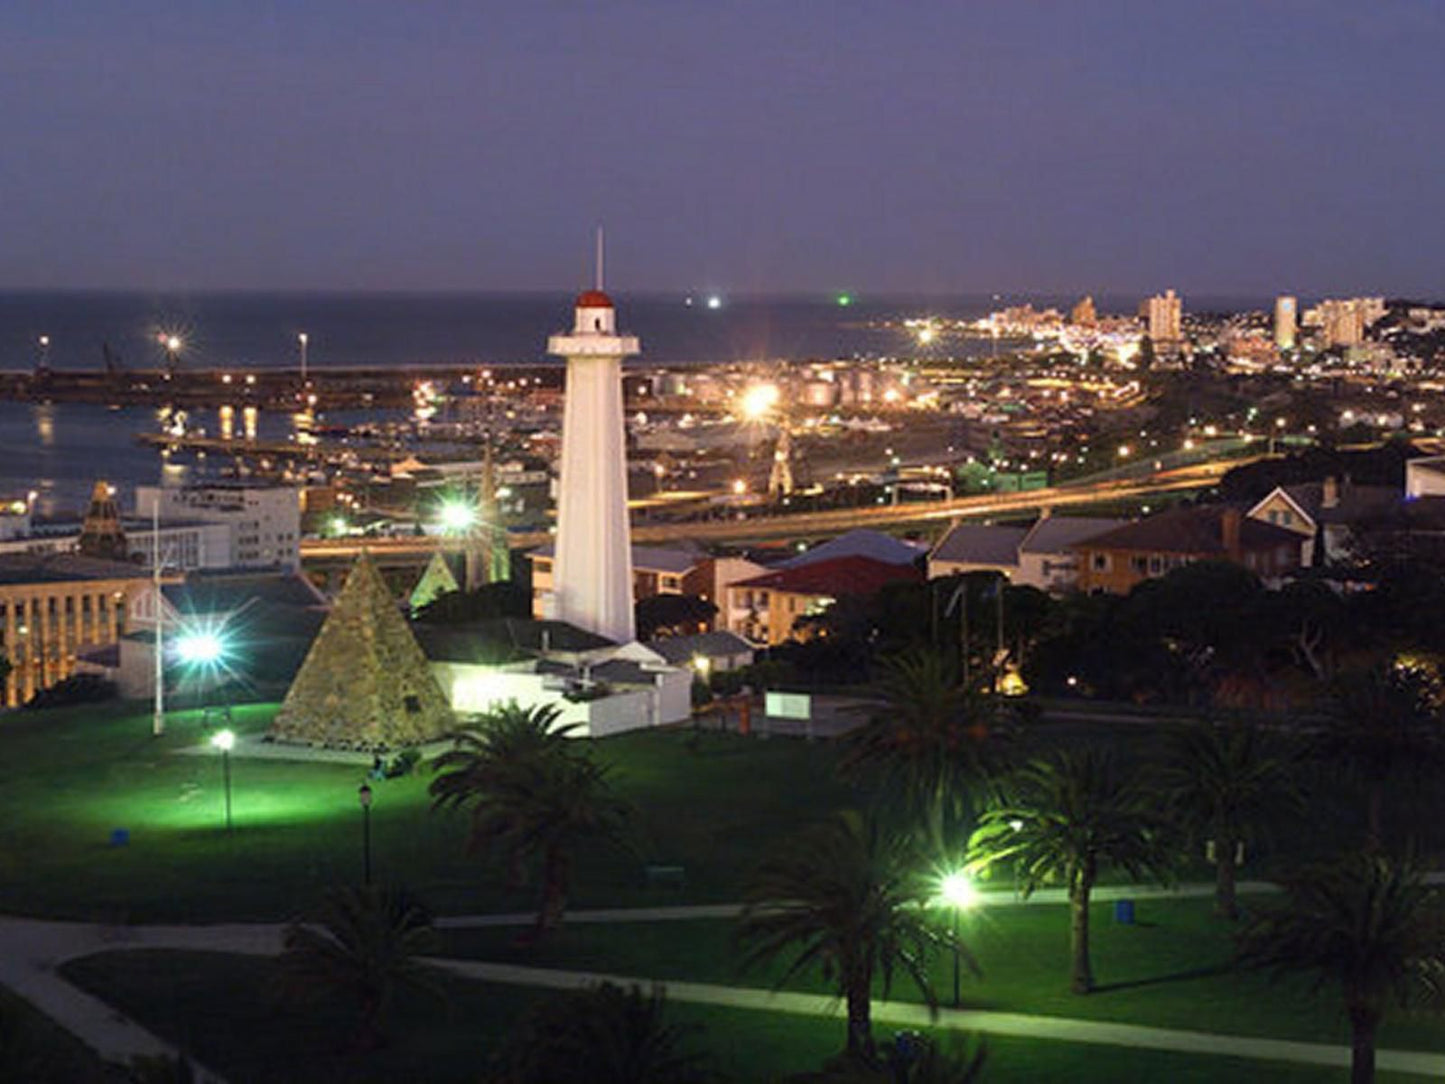 Sunset Events And Accommodation Summerstrand Port Elizabeth Eastern Cape South Africa Palm Tree, Plant, Nature, Wood, Tower, Building, Architecture